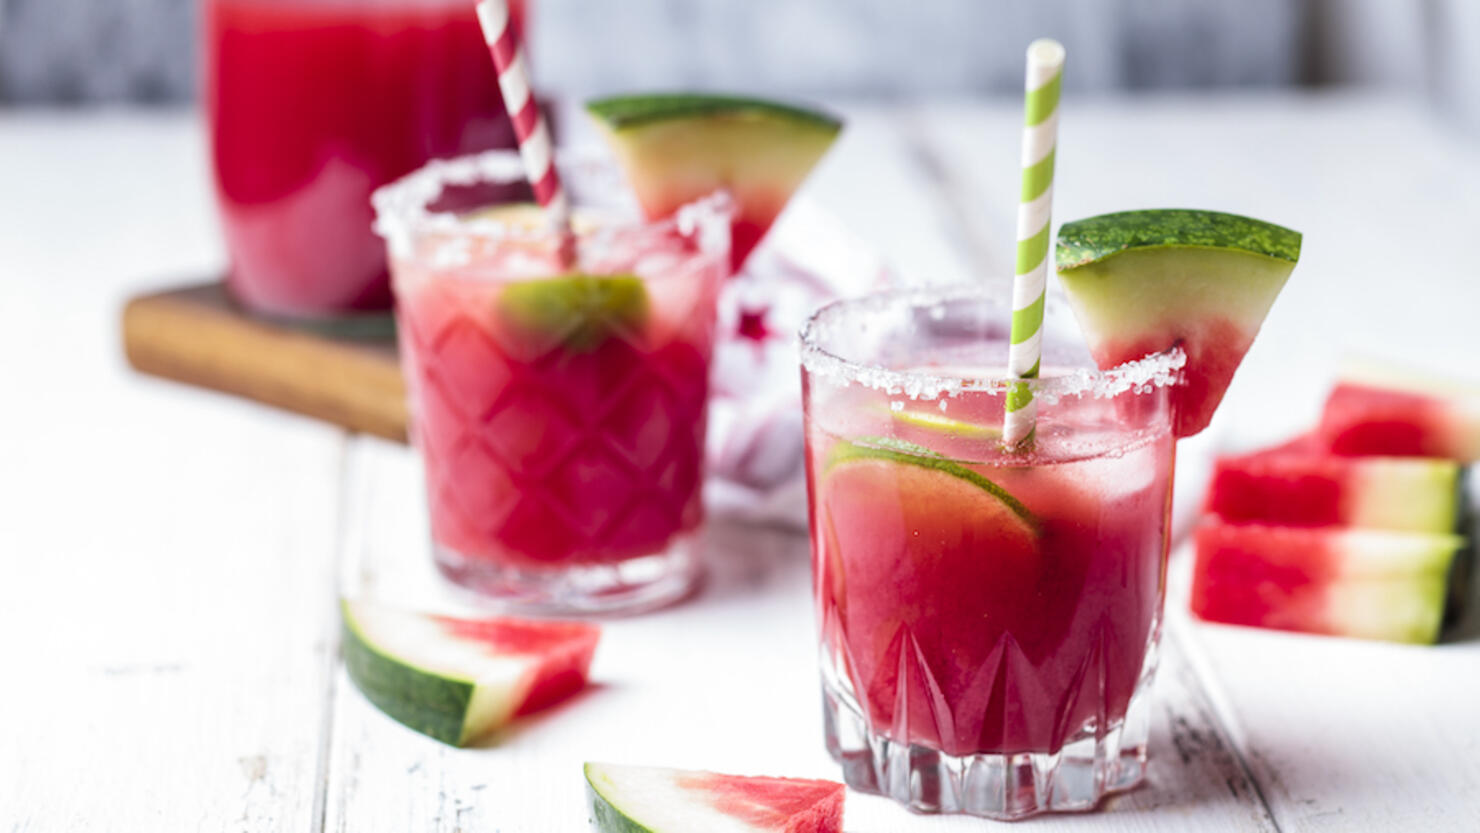 Glasses of Melon Margarita with watermelon juice